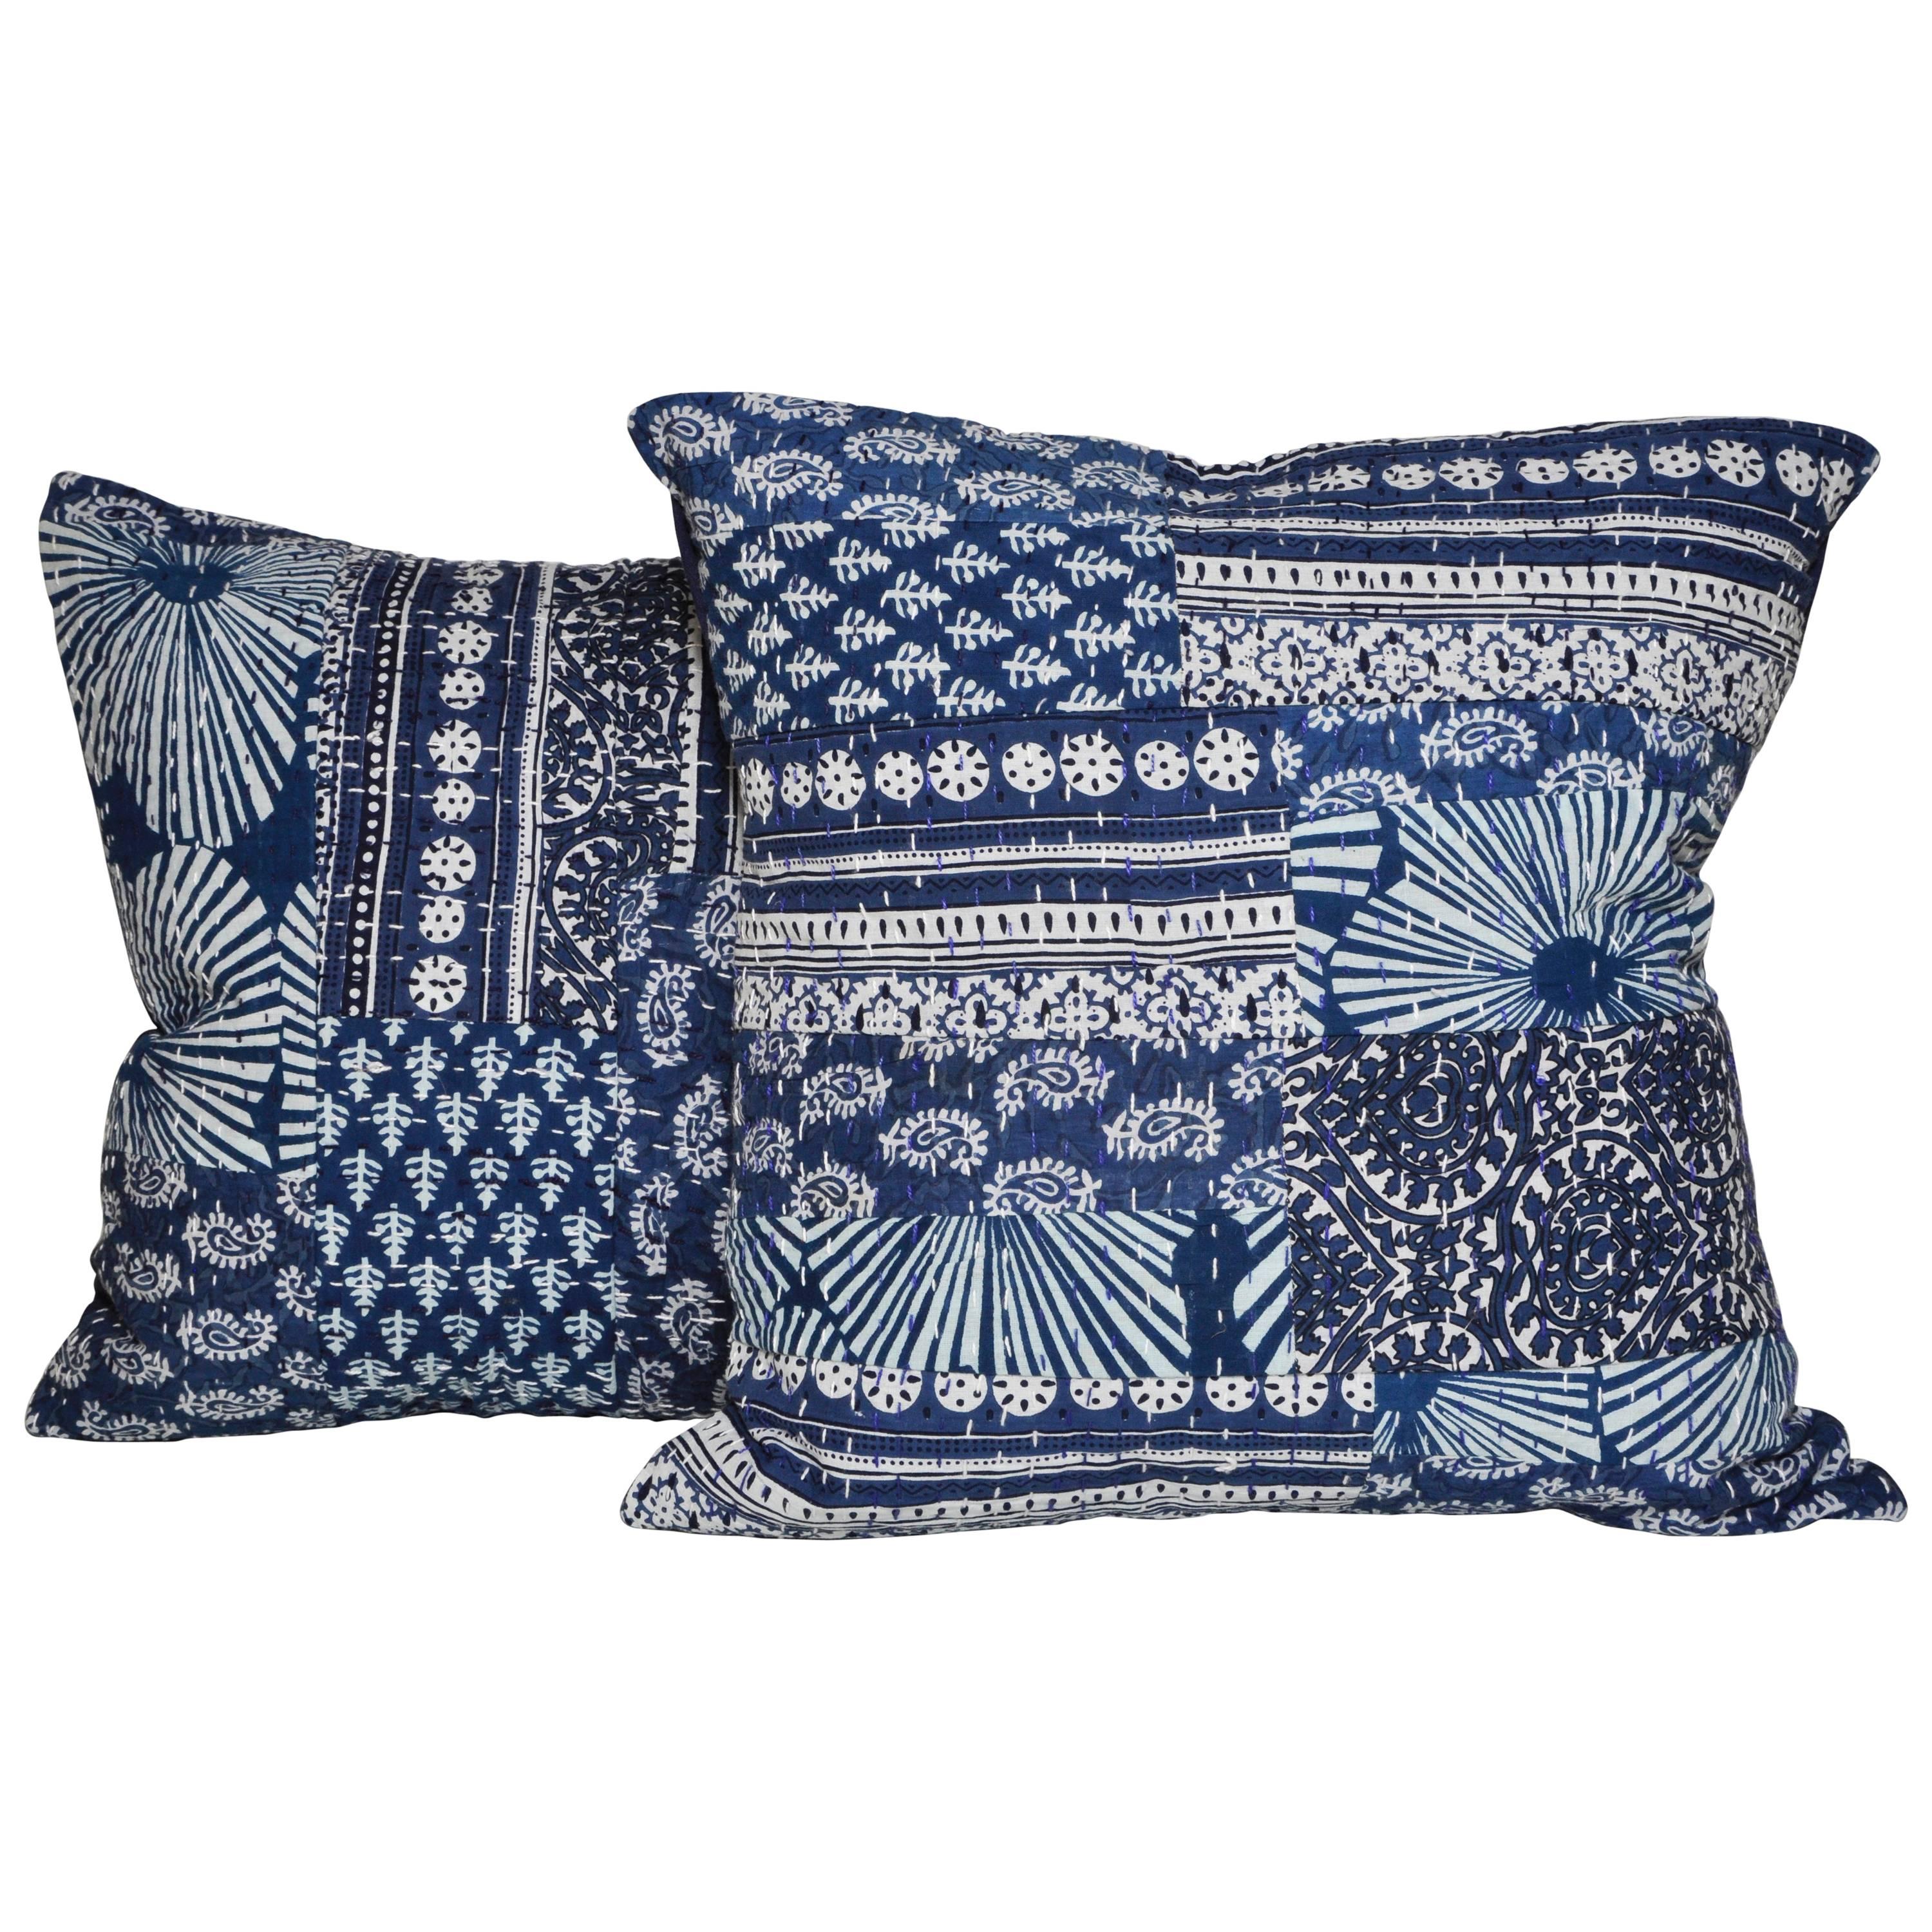 Beautiful set of ethnic pillows (cushions). Vintage Indian indigo cotton hand dyed with a traditional and time consuming wood block print pattern backed in 100% pure Irish linen. An exquisite patchwork of complimenting patterns including stylized